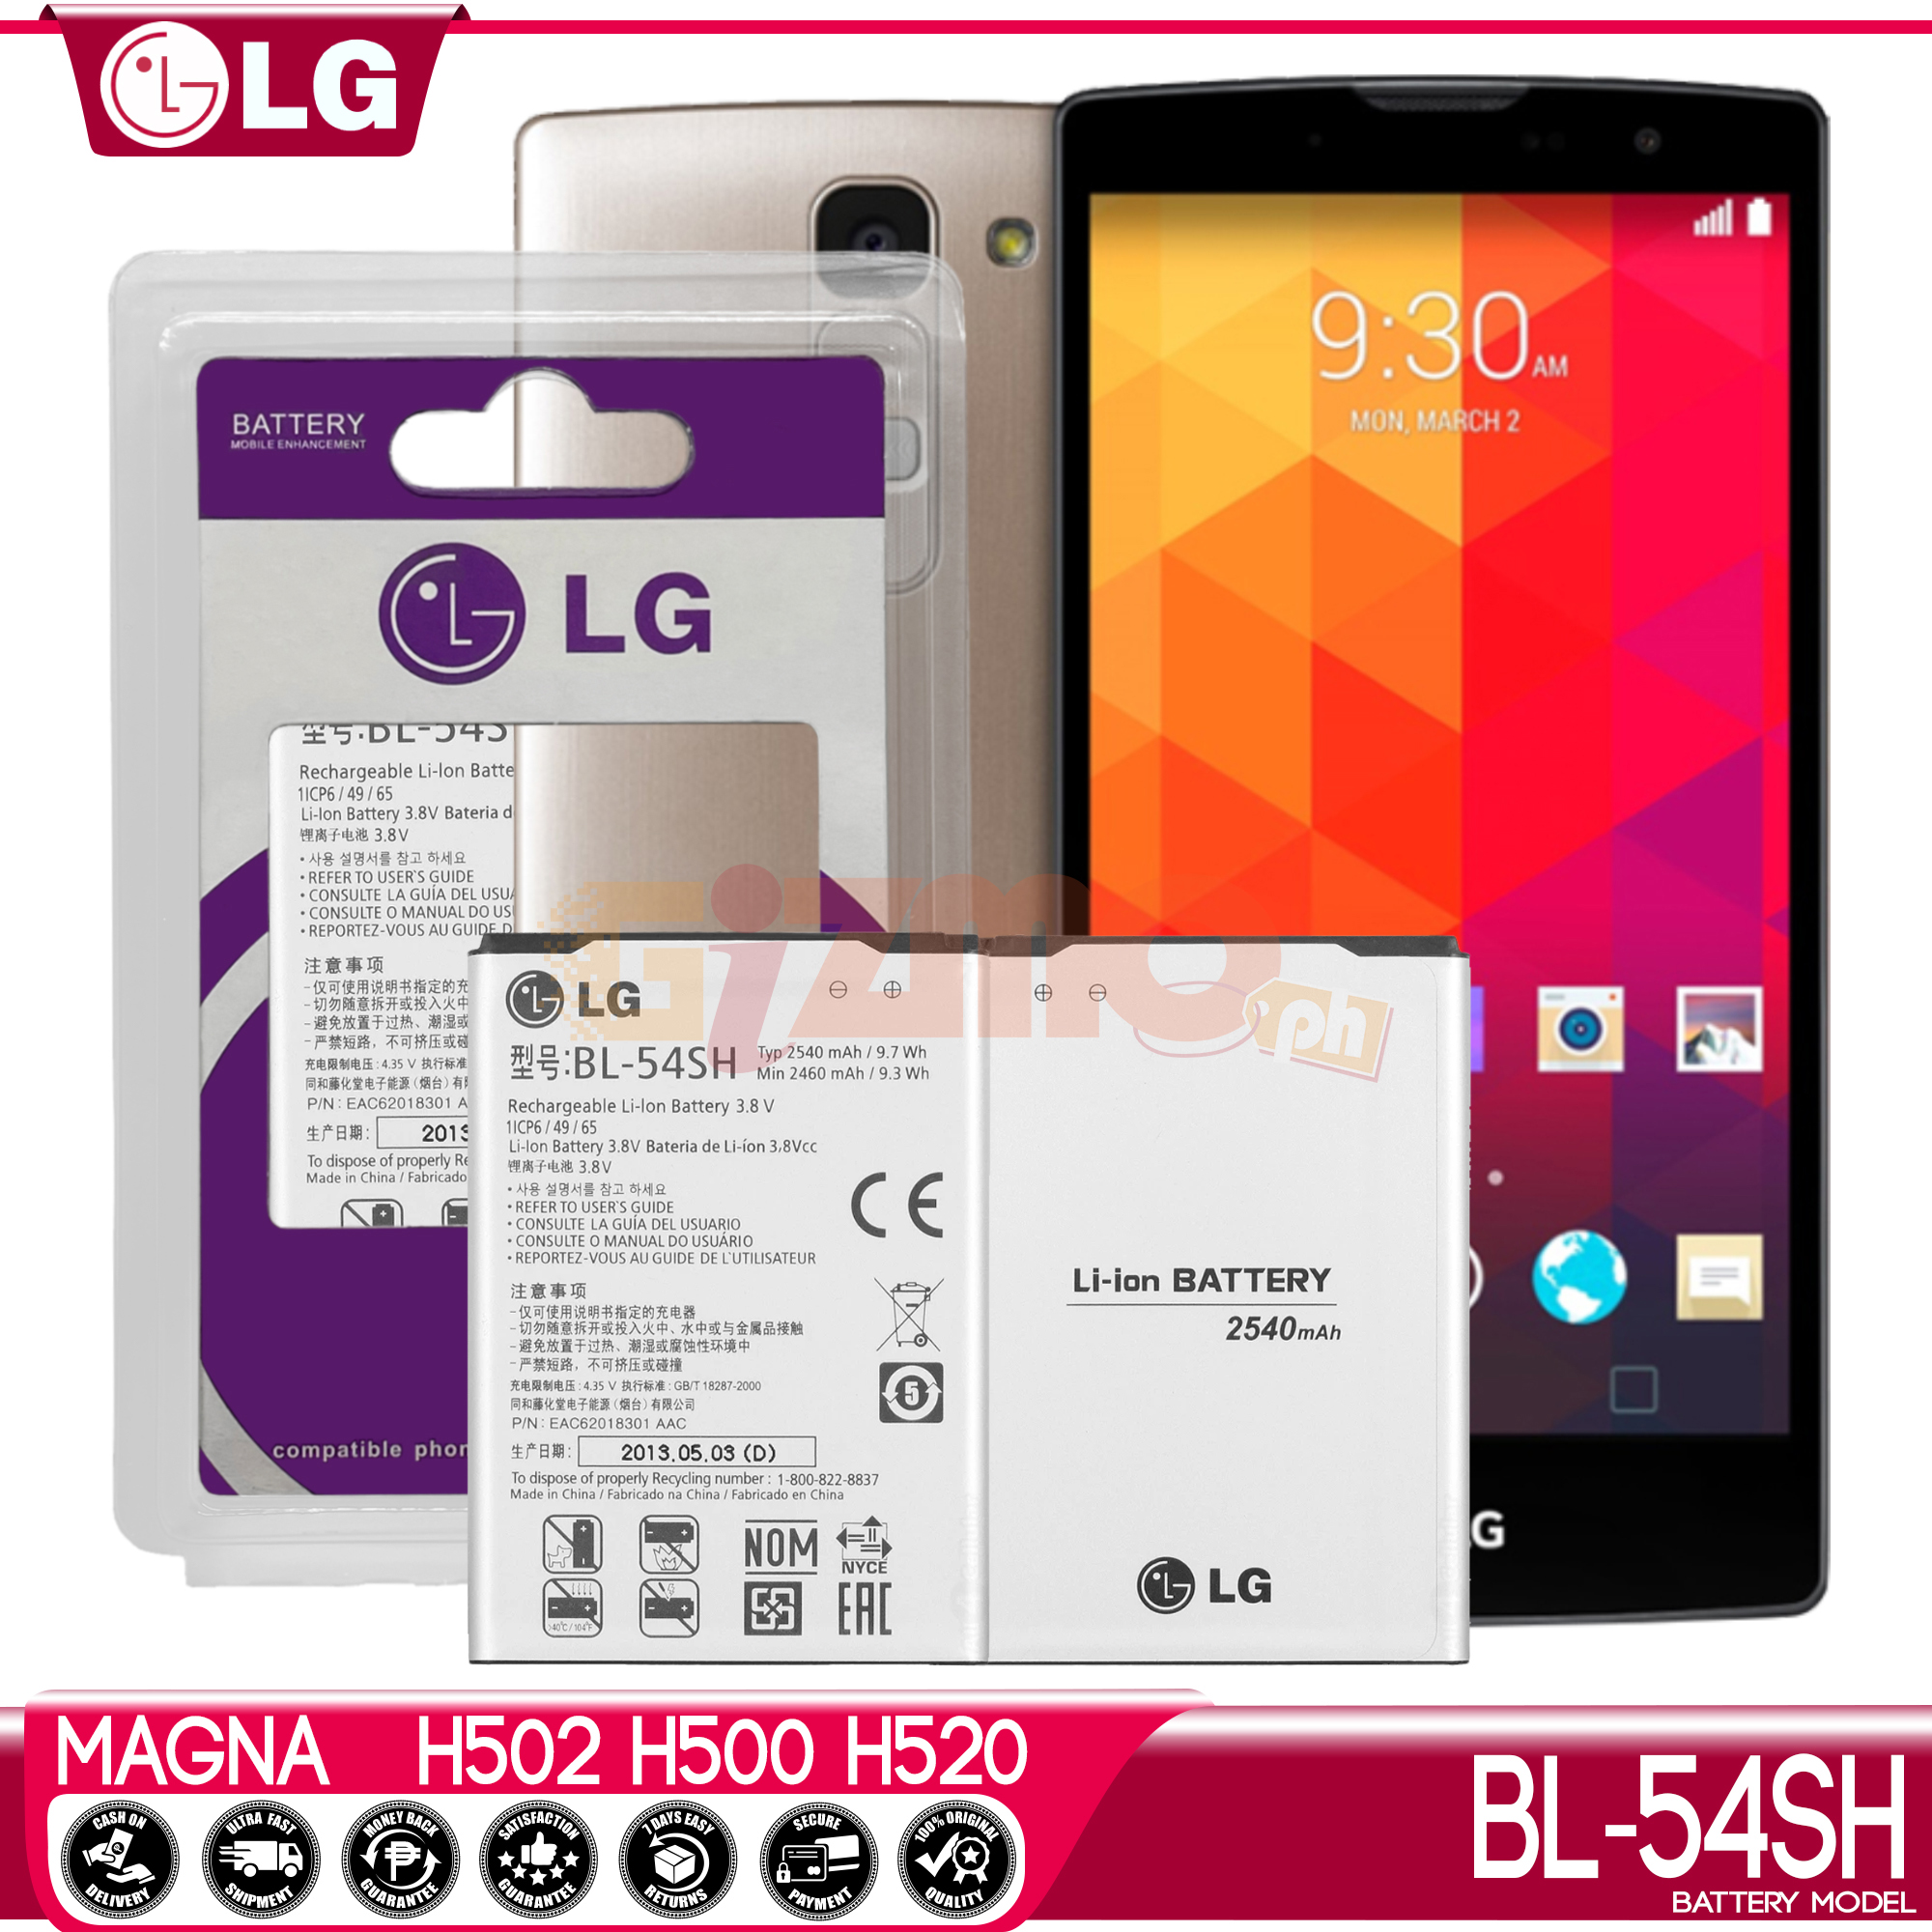 Battery BL-54SH Model Compatible with LG Magna H502 L90 / D405 / D415 with  Capacity of Li-Ion 2540mAh Non Removable Compatible to your Mobile Phones  Best Quality  Same Size as Original